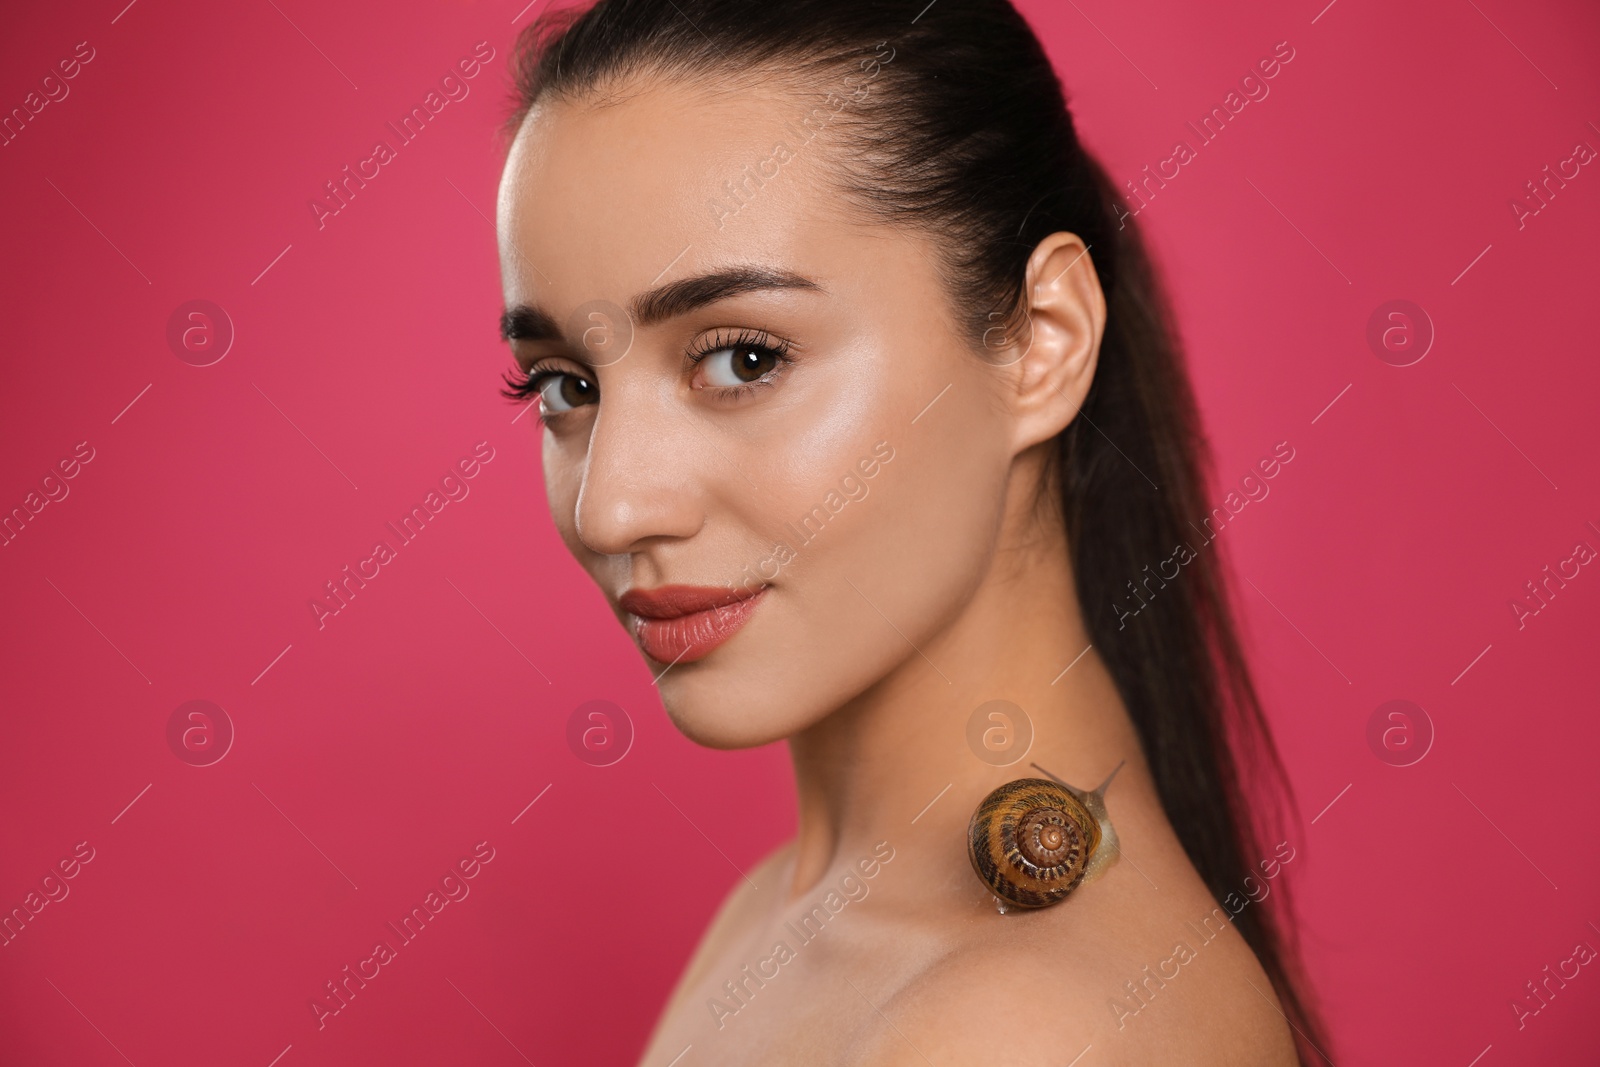 Photo of Beautiful young woman with snail on her neck against pink background